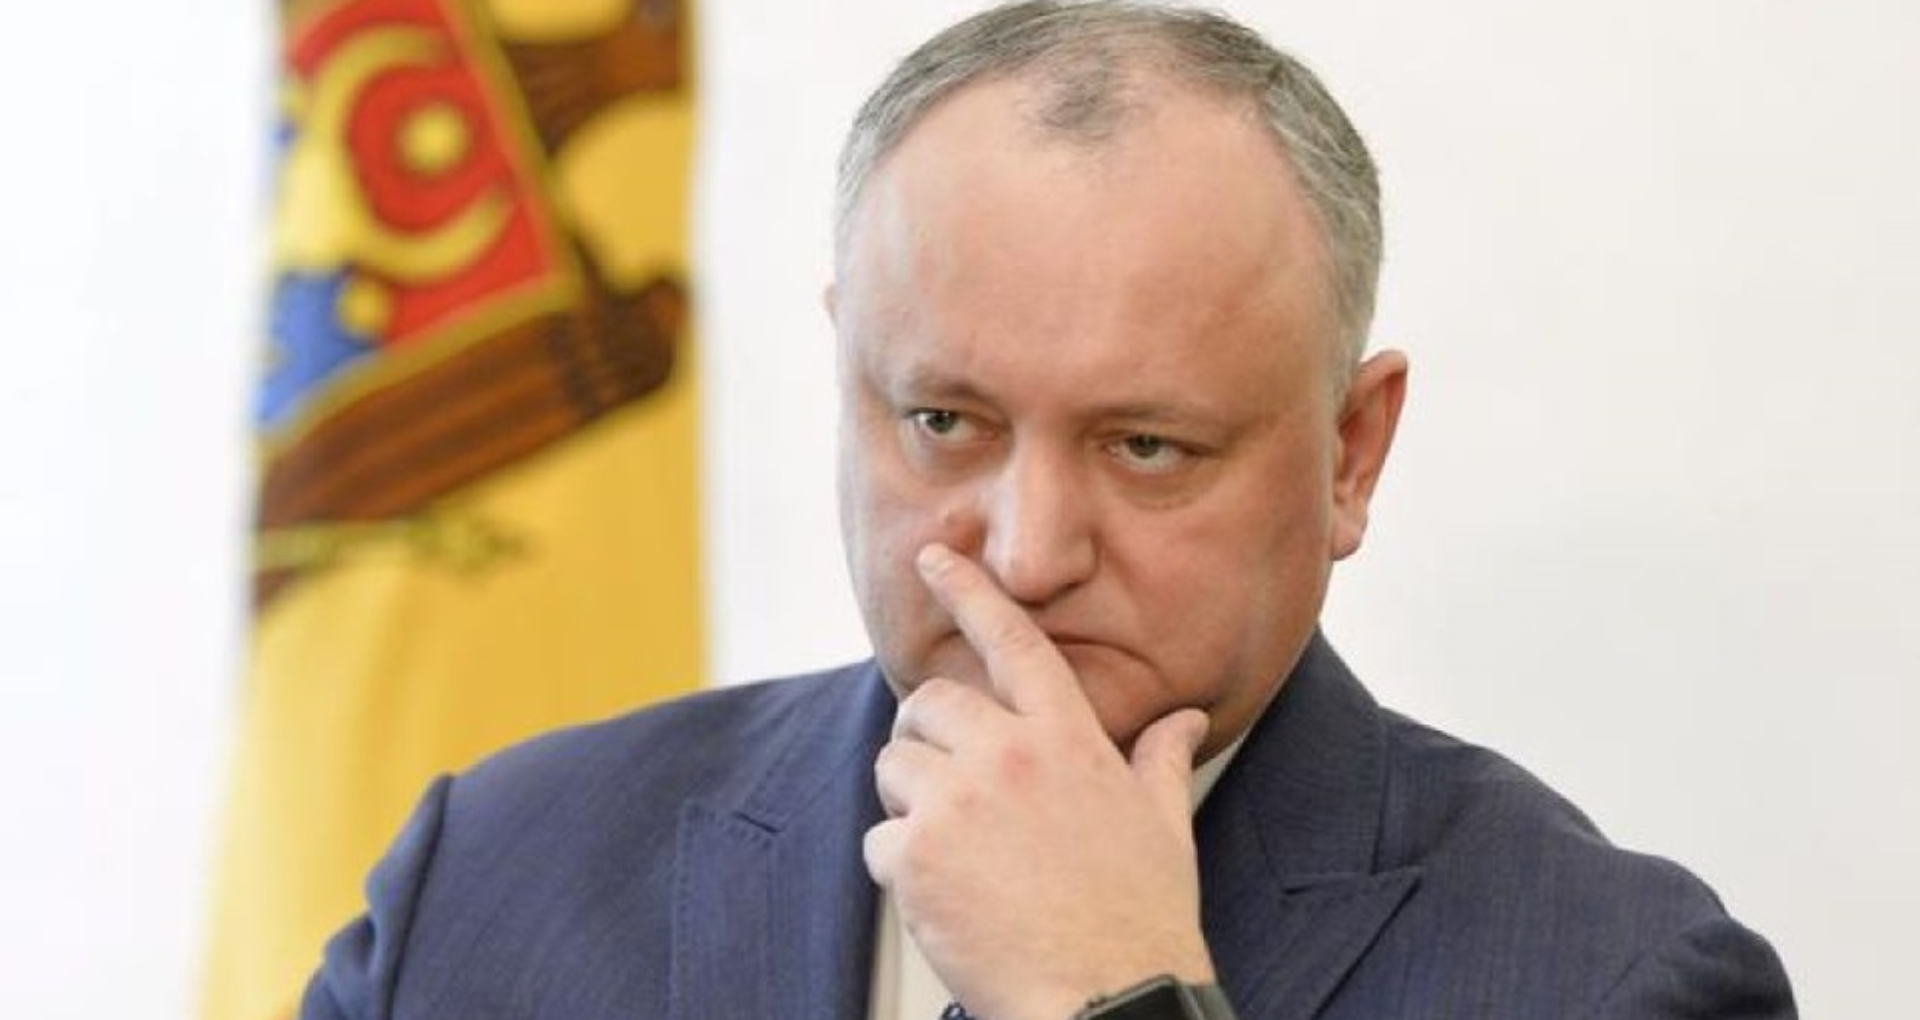 Dodon’s defenders’open letter to the Anti-Corruption Prosecutor’s Office: Acts of “hooliganism” have been committed against the socialist’s mother and “controlled leaks of confidential information” have been admitted